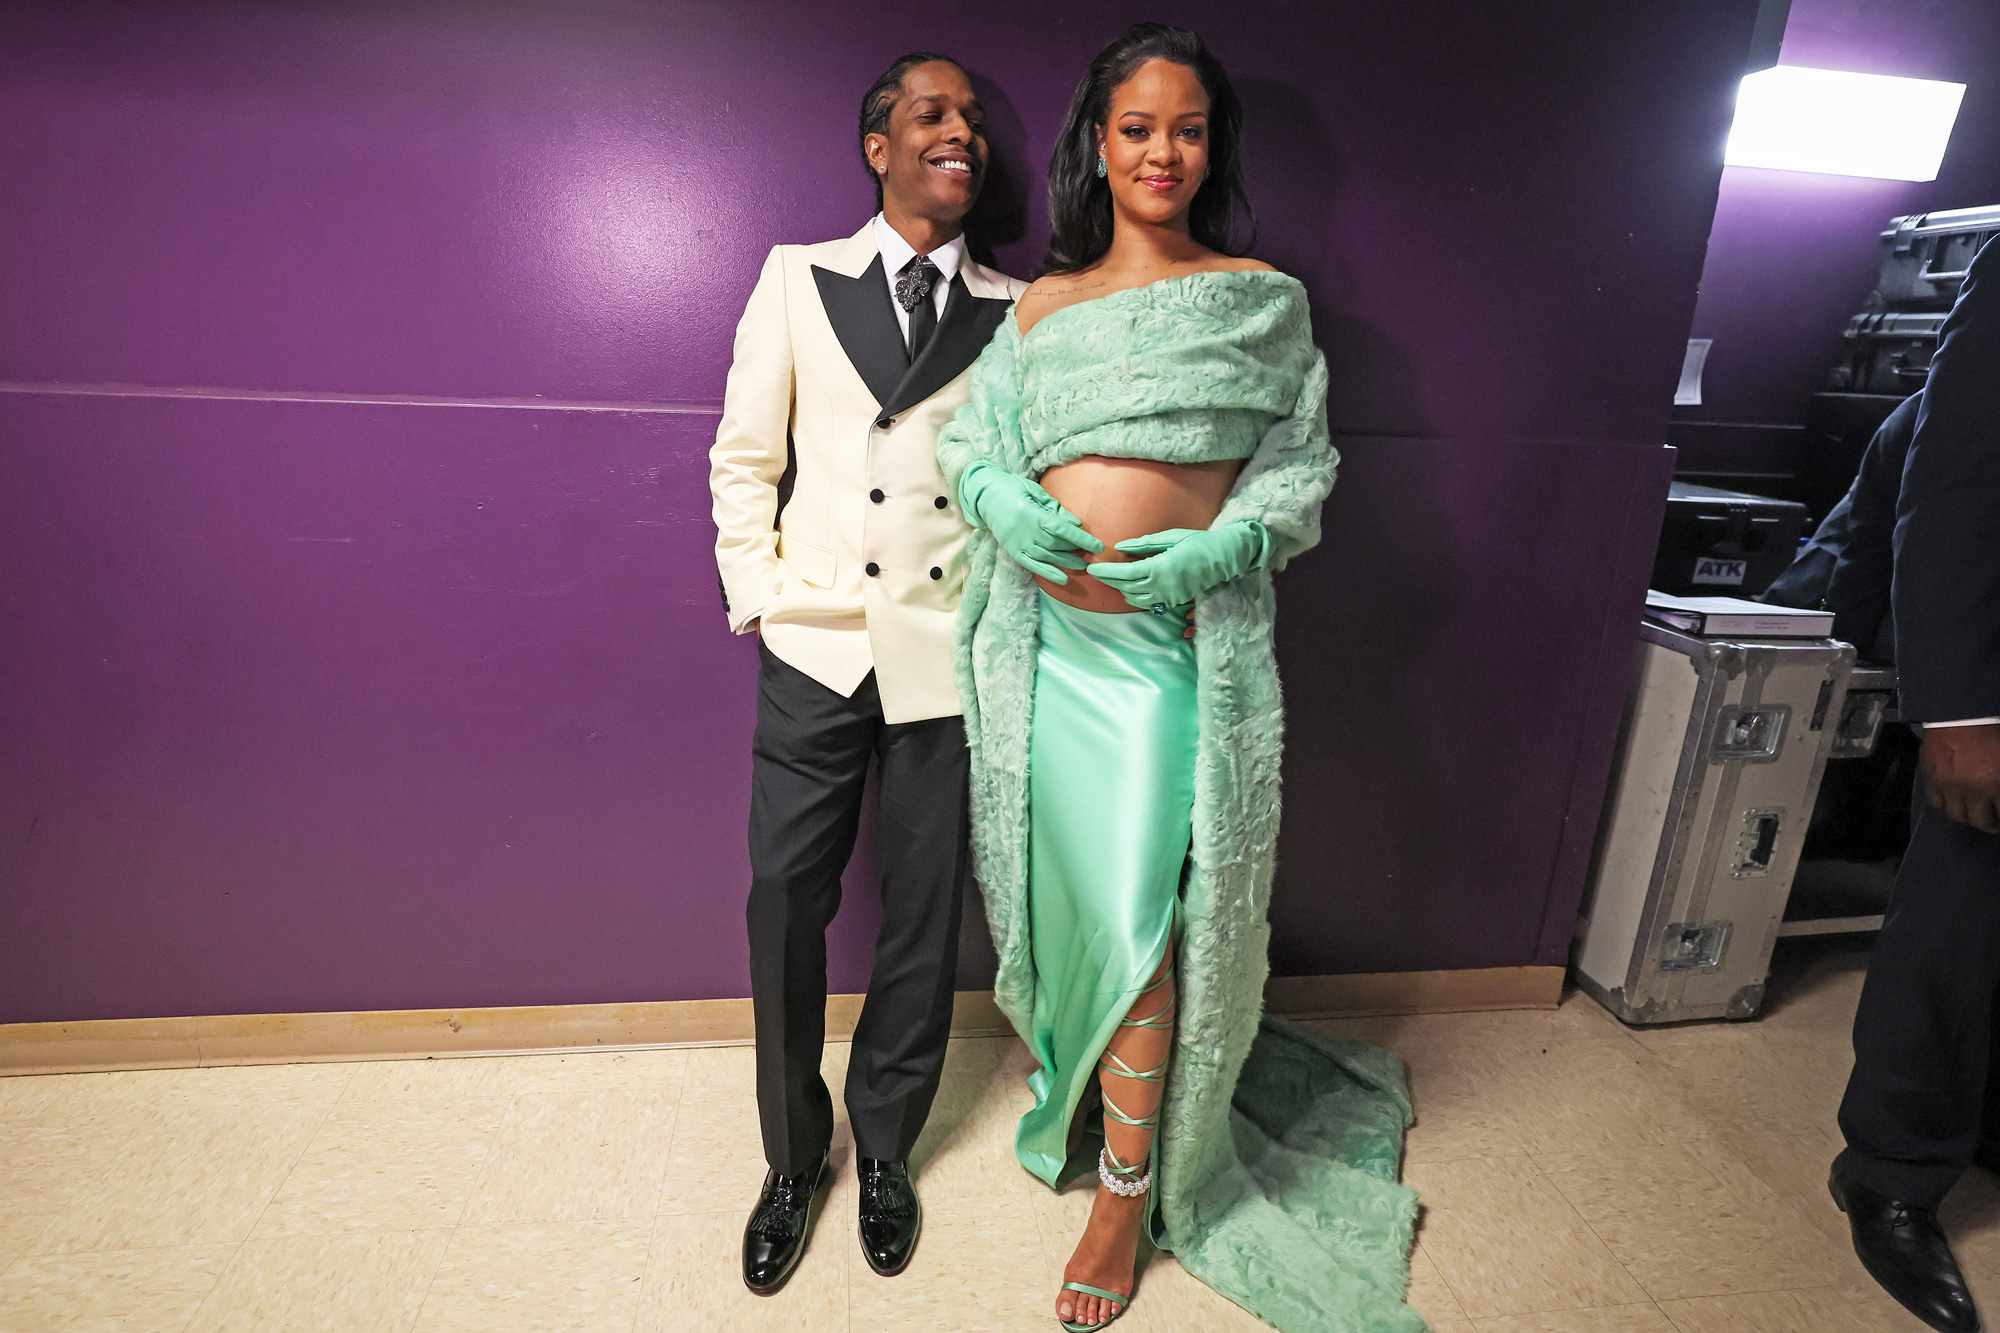 ASAP Rocky and Rihanna backstage at the 95th Academy Awards at the Dolby Theatre on March 12, 2023 in Hollywood, California.